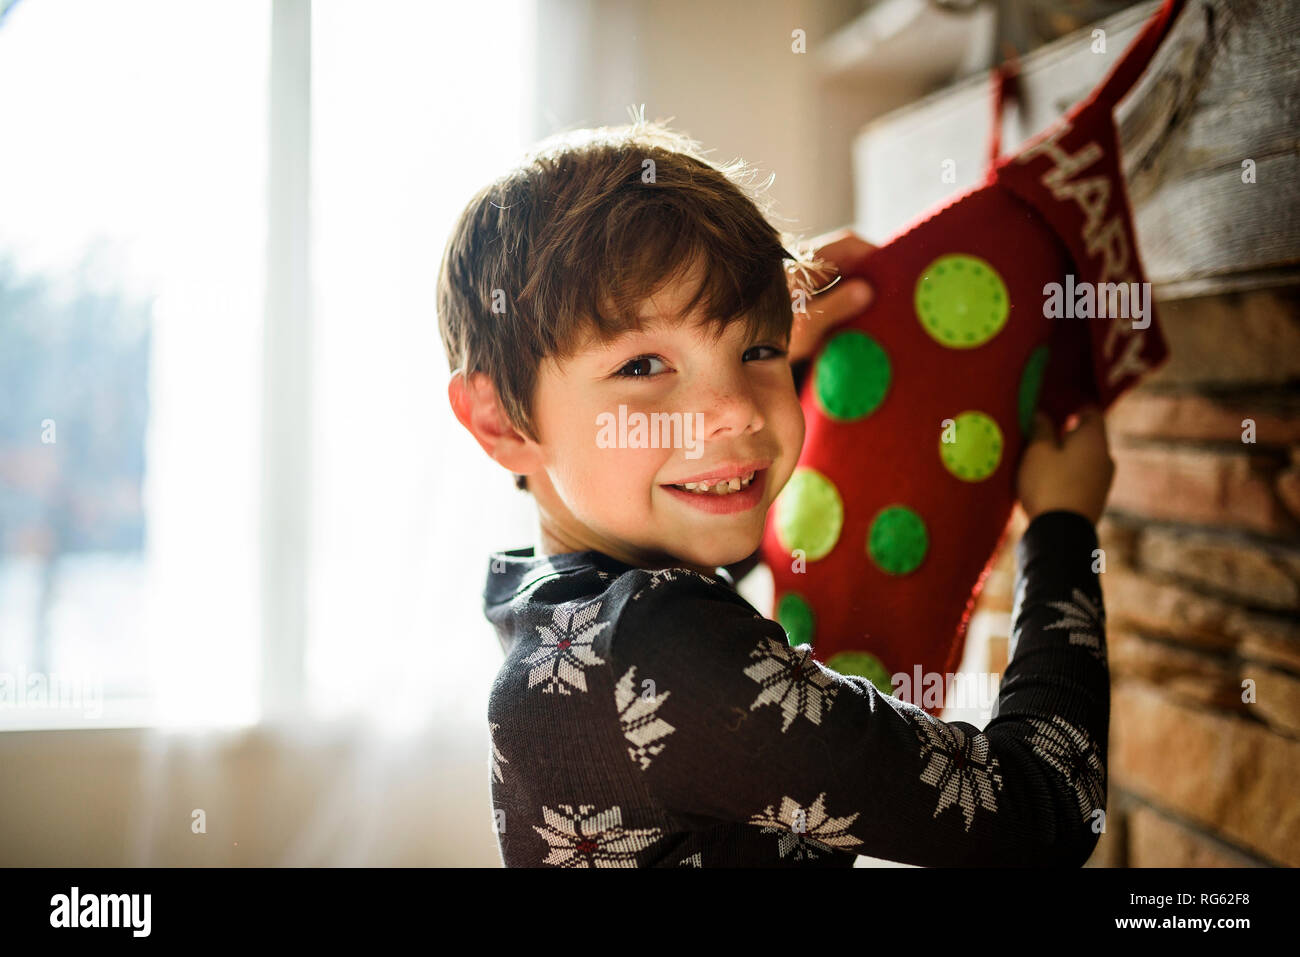 Smiling Boy hanging a Christmas stocking on a fireplace Stock Photo